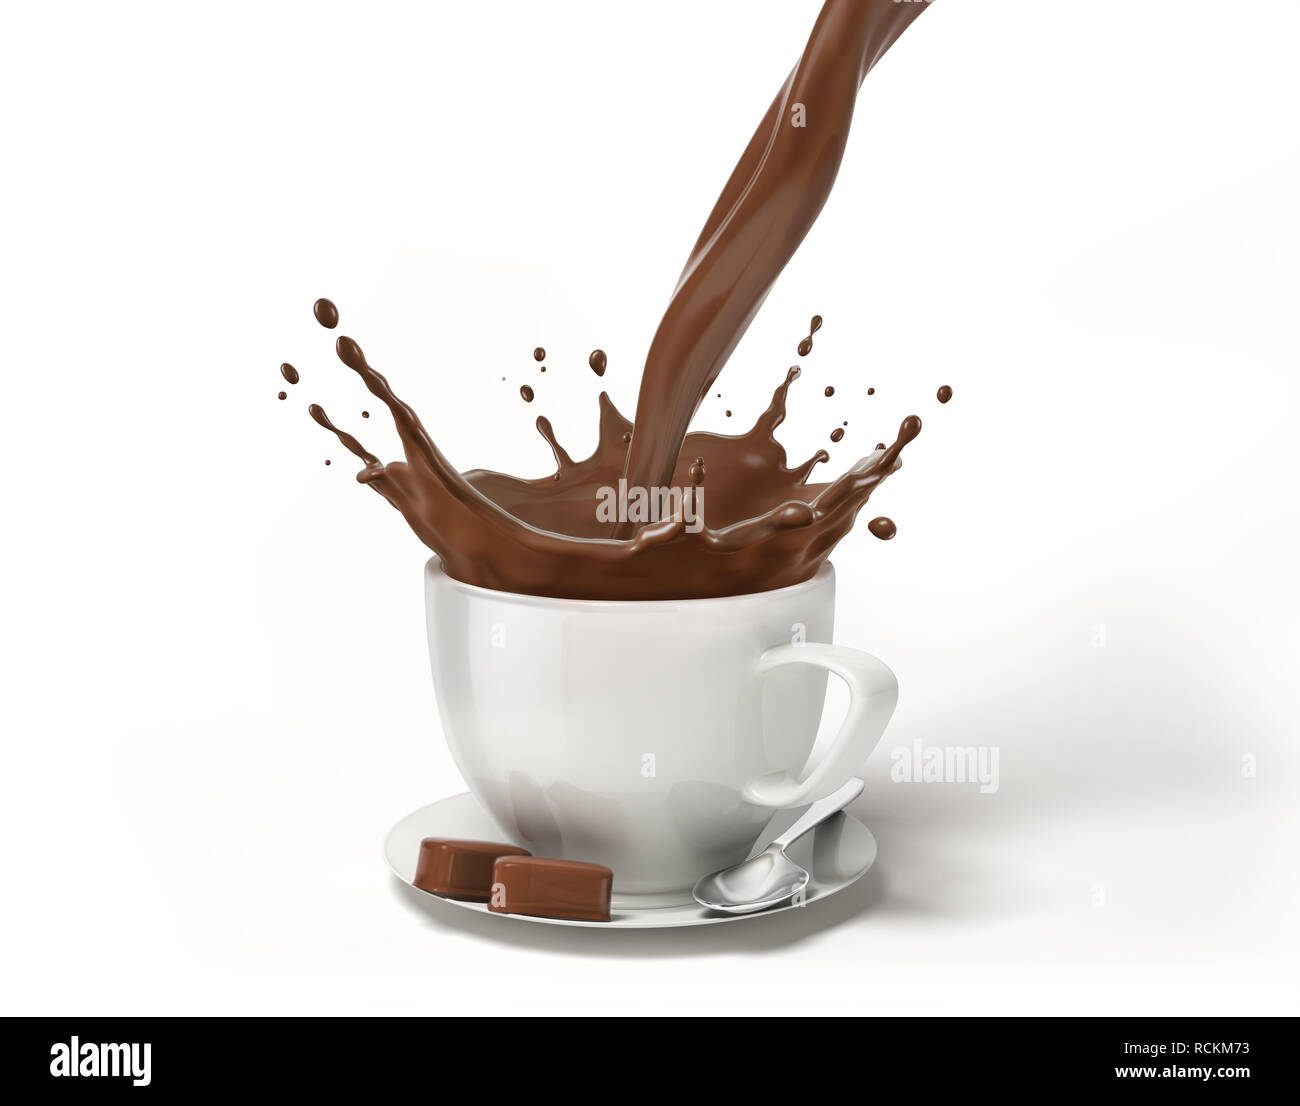 White cup on saucer with spoon, with liquid chocolate splash in it. Isolated on white background. Stock Photo